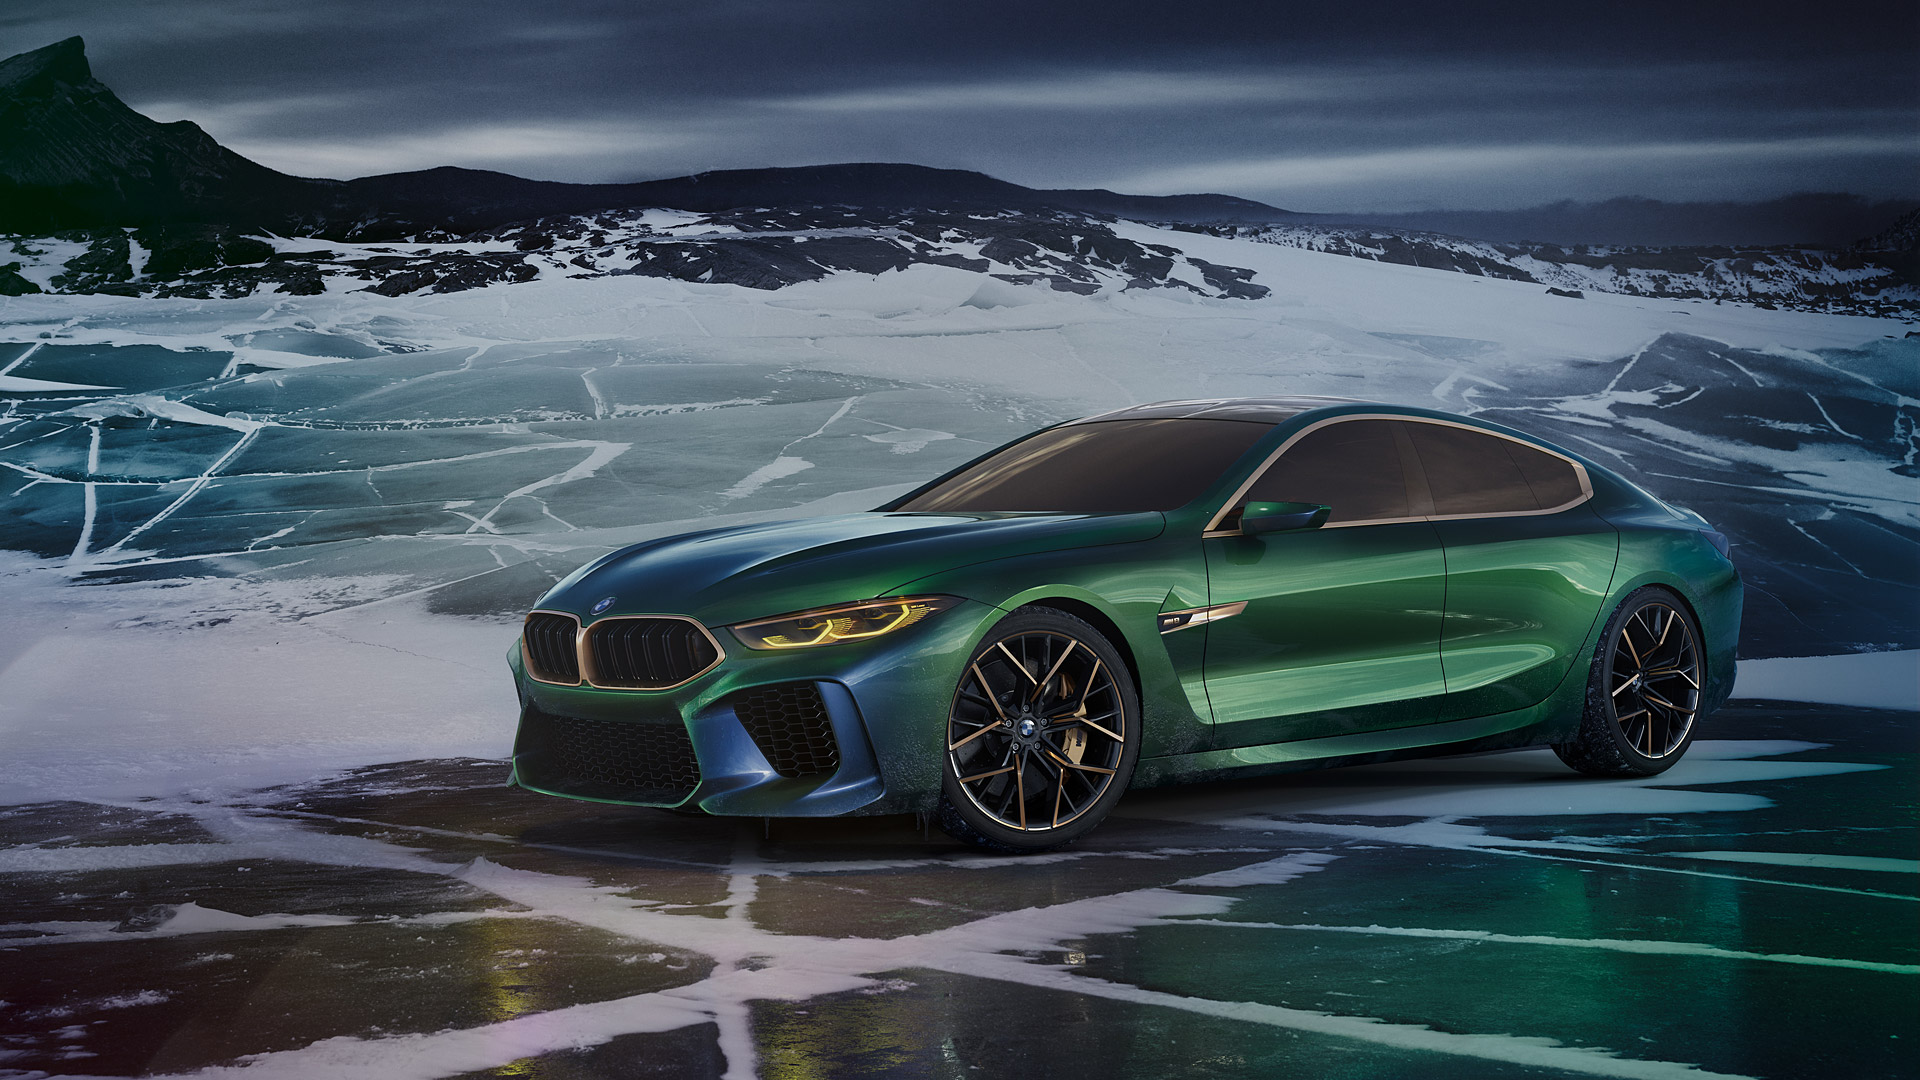 Bmw M8 Gran Coupe Concept Wallpaper HD Image Wsupercars